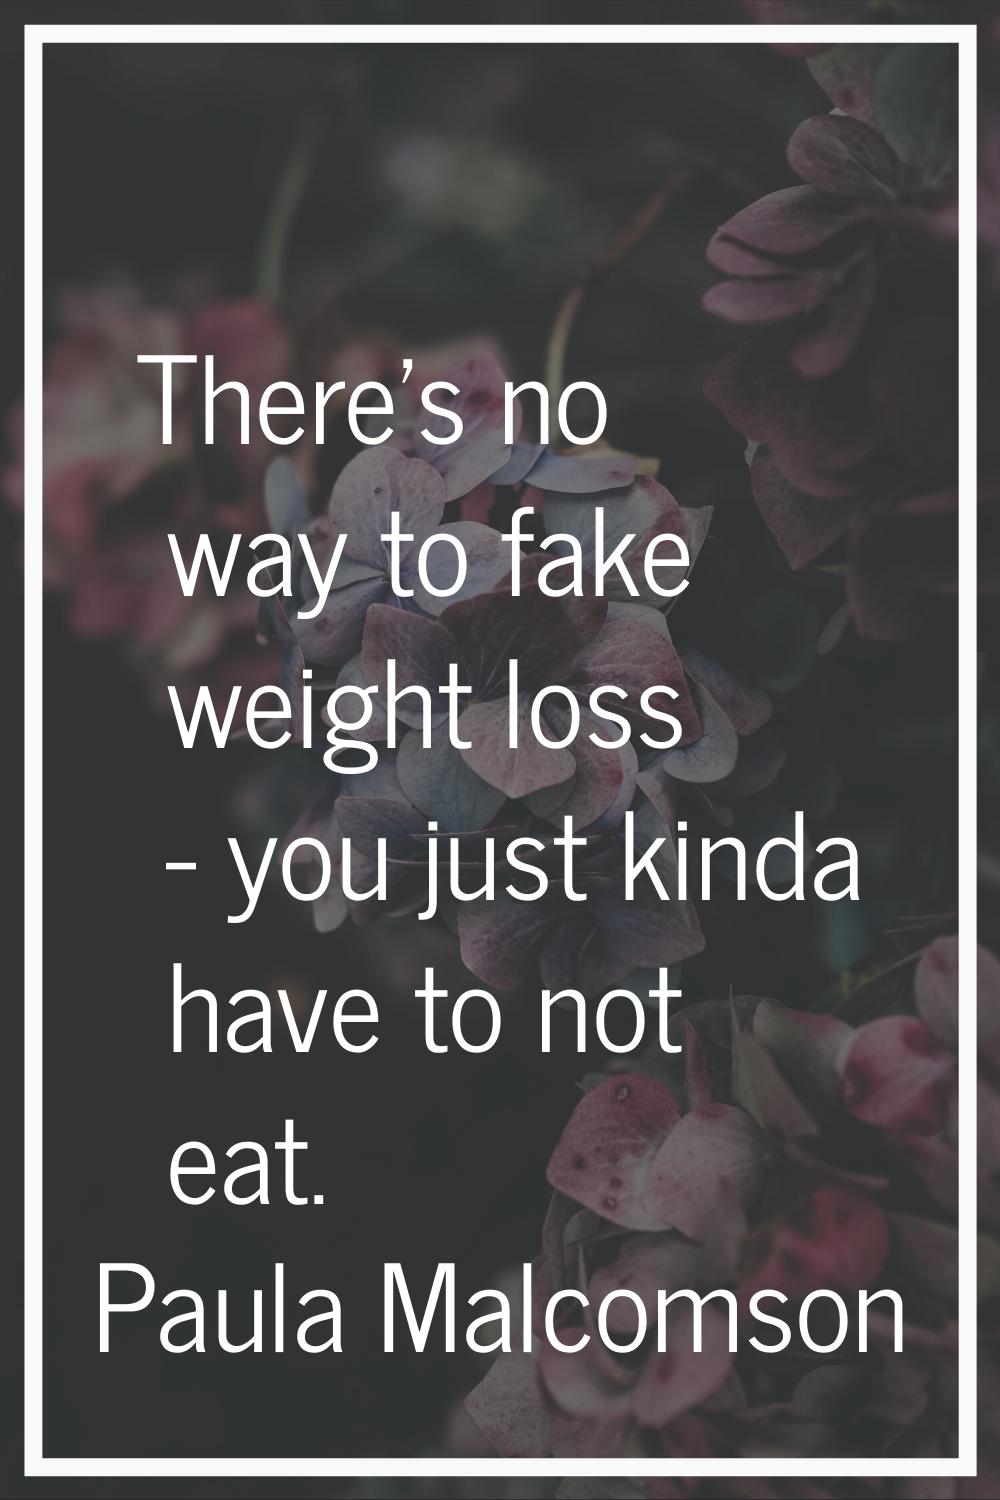 There's no way to fake weight loss - you just kinda have to not eat.